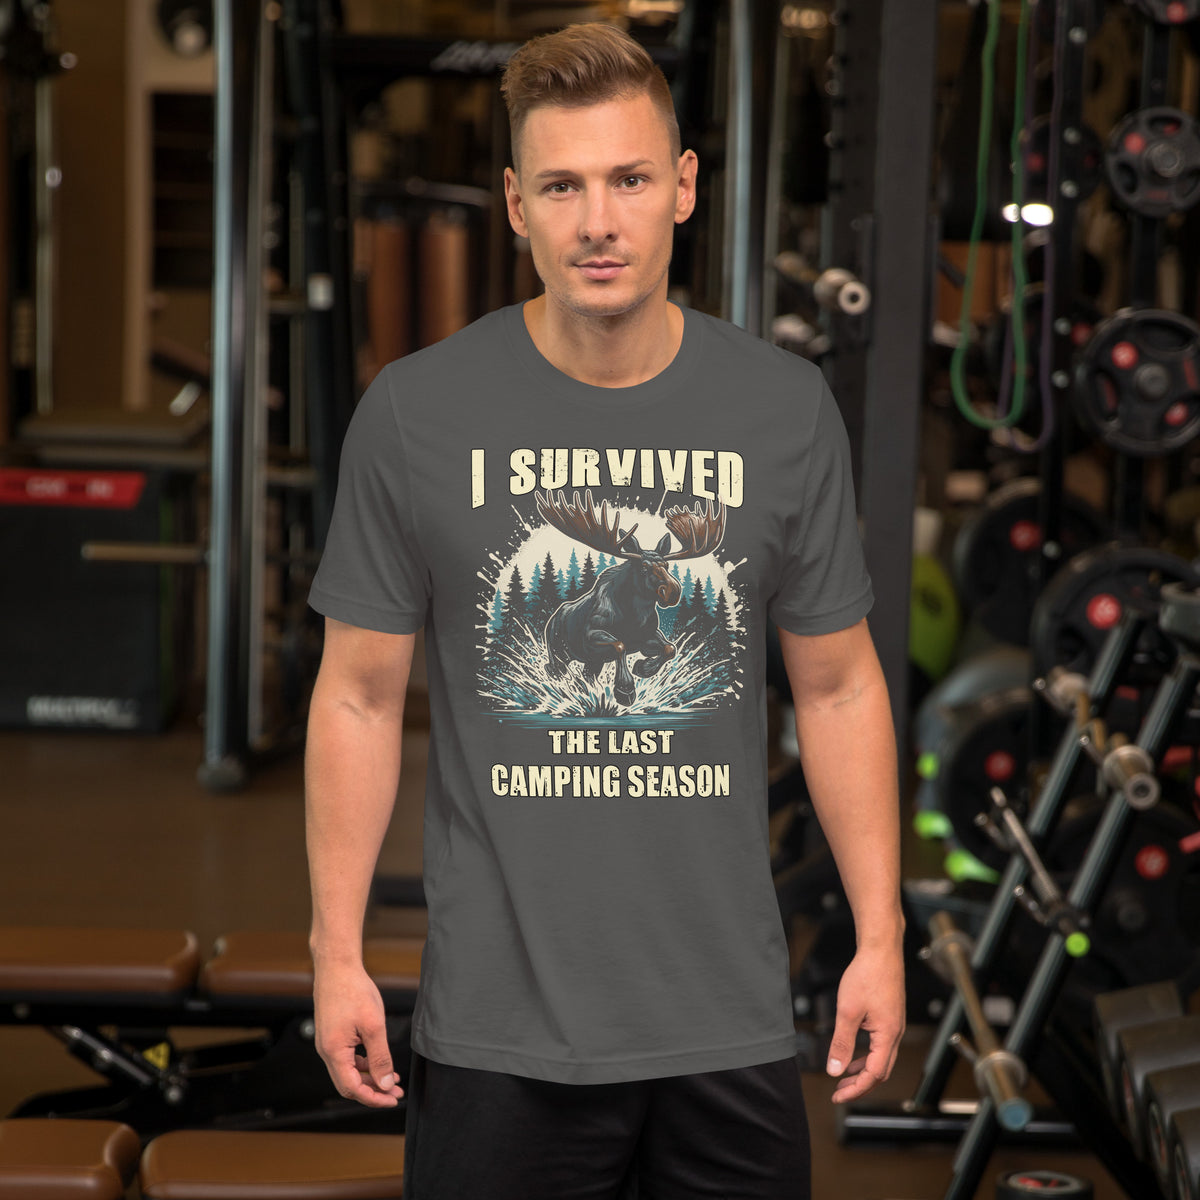 Cooles Herren Spruch Shirt "I Survived the Last Camping Season"